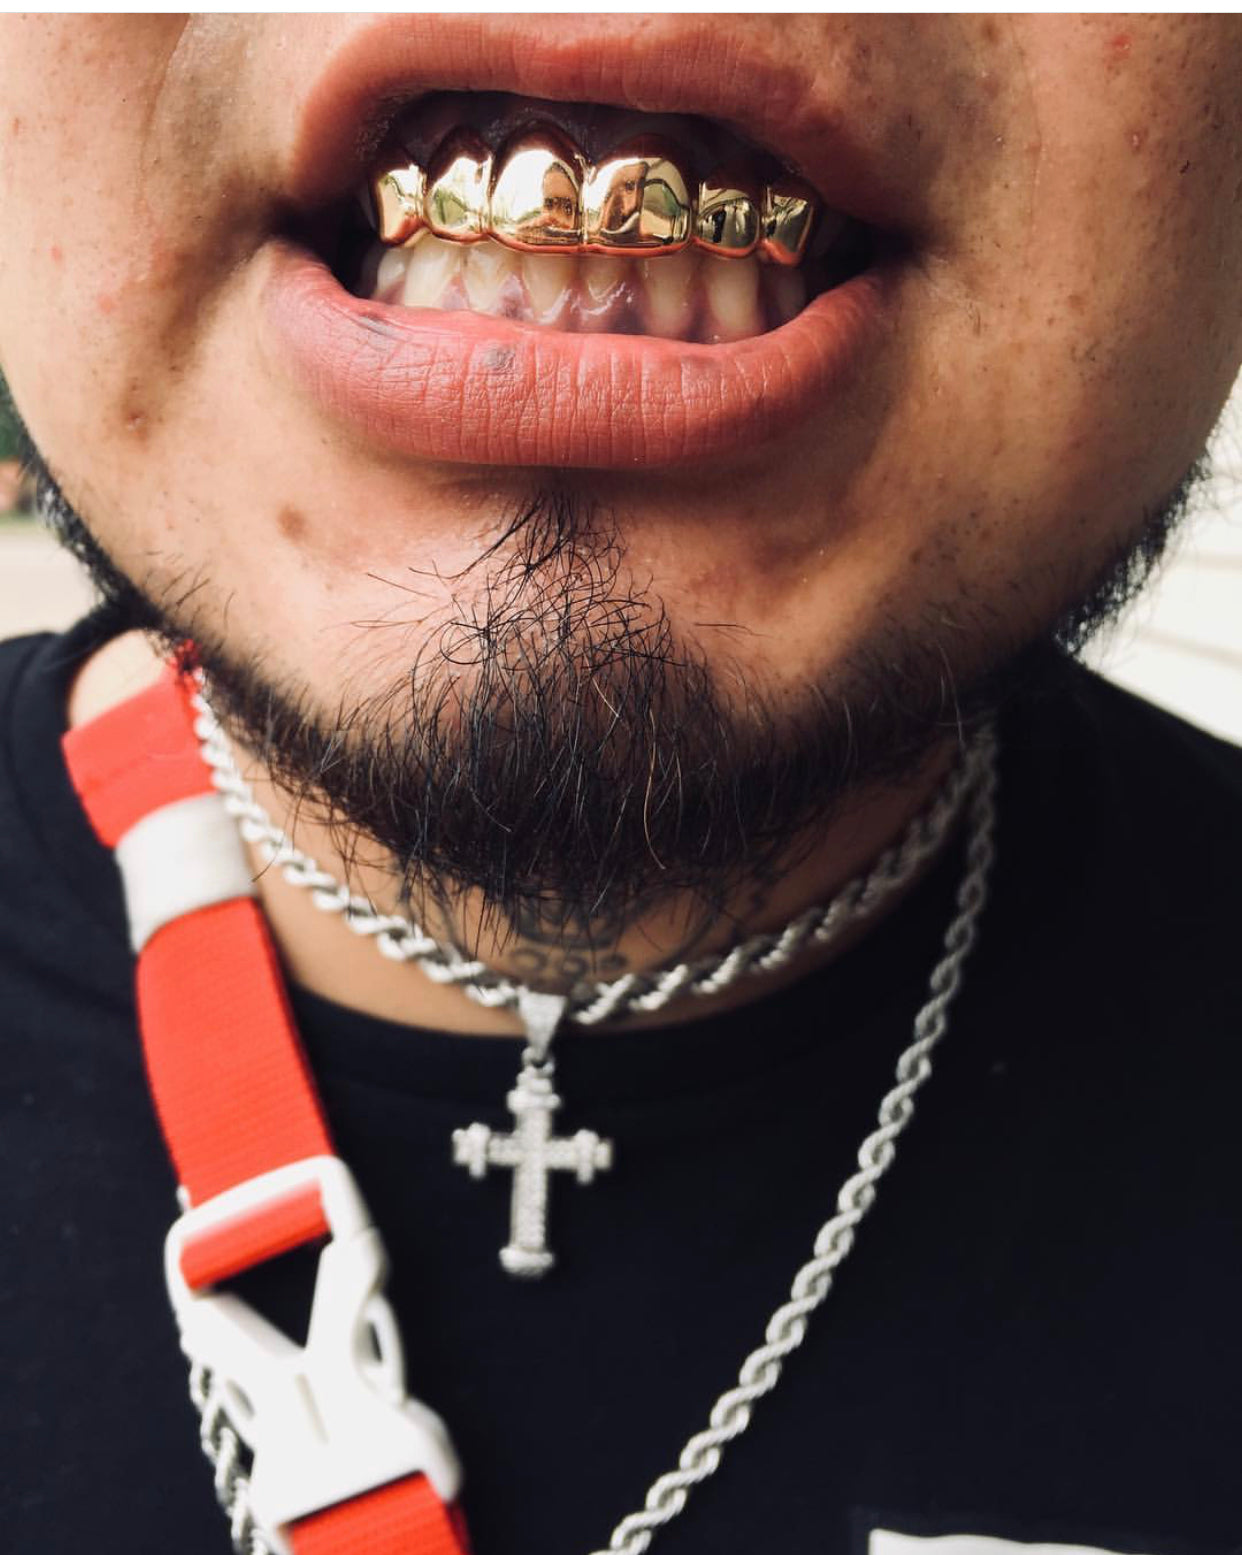 Solid Gold Grillz Made to Order, Custom Fitted Teeth Grillz - GRILLZSTATION 